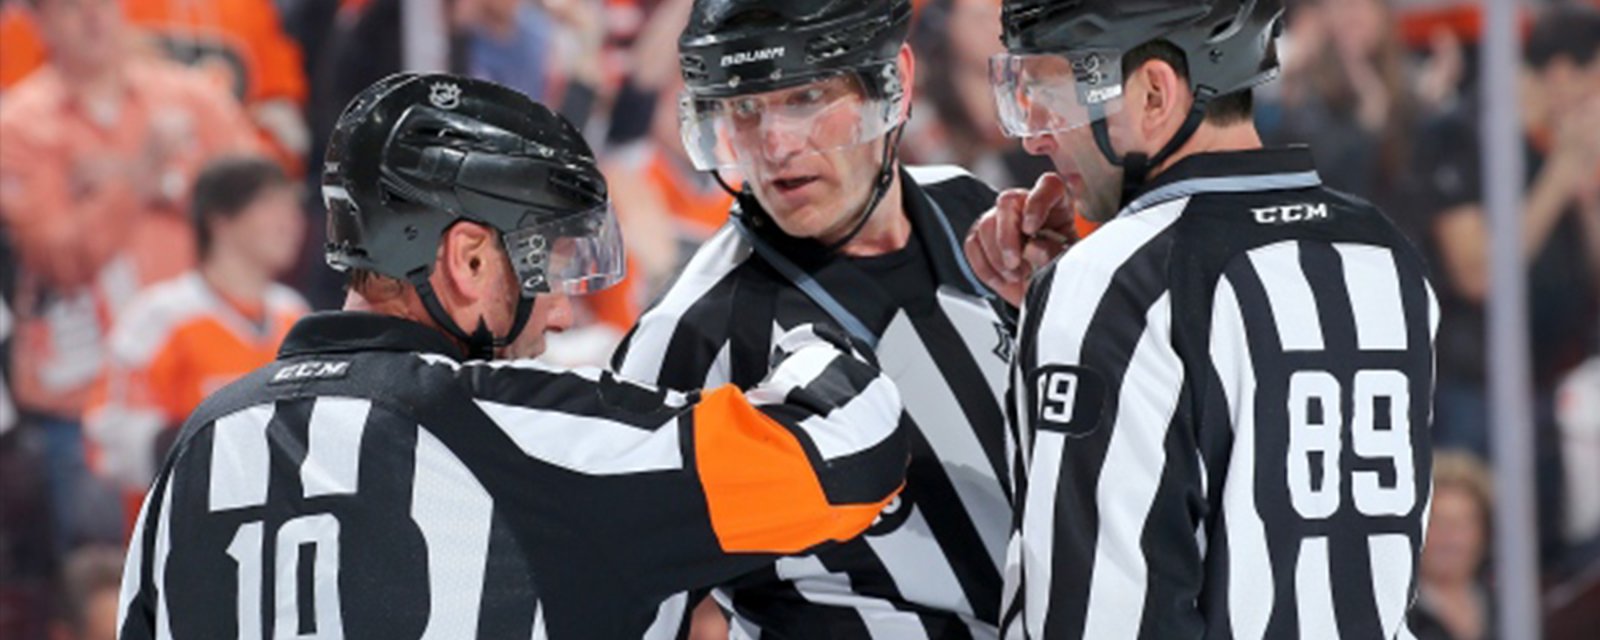 Female referees in the NHL!?